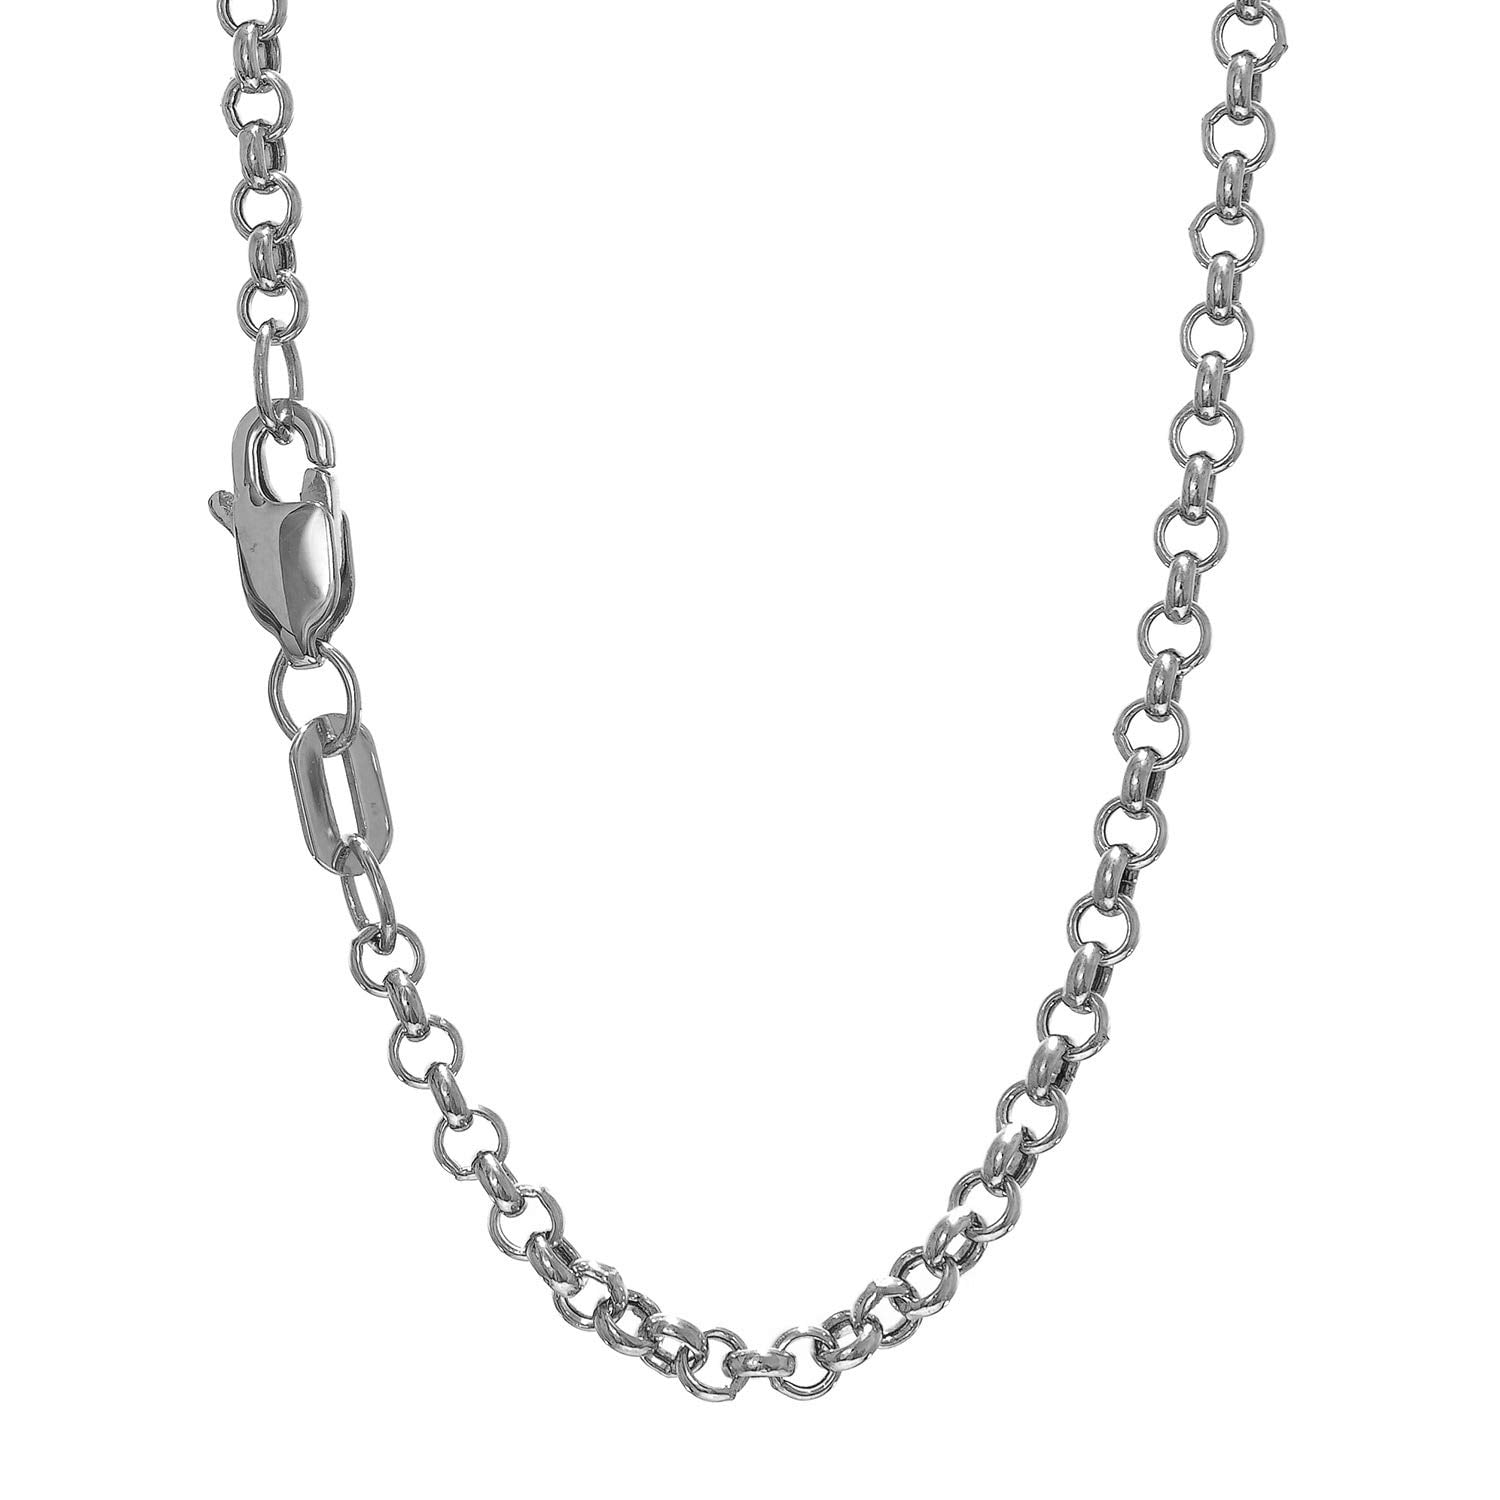 14k White Gold Round Cable ROLO Link Pendant Chain/Necklace 30" 2.3mm 4.3 grams